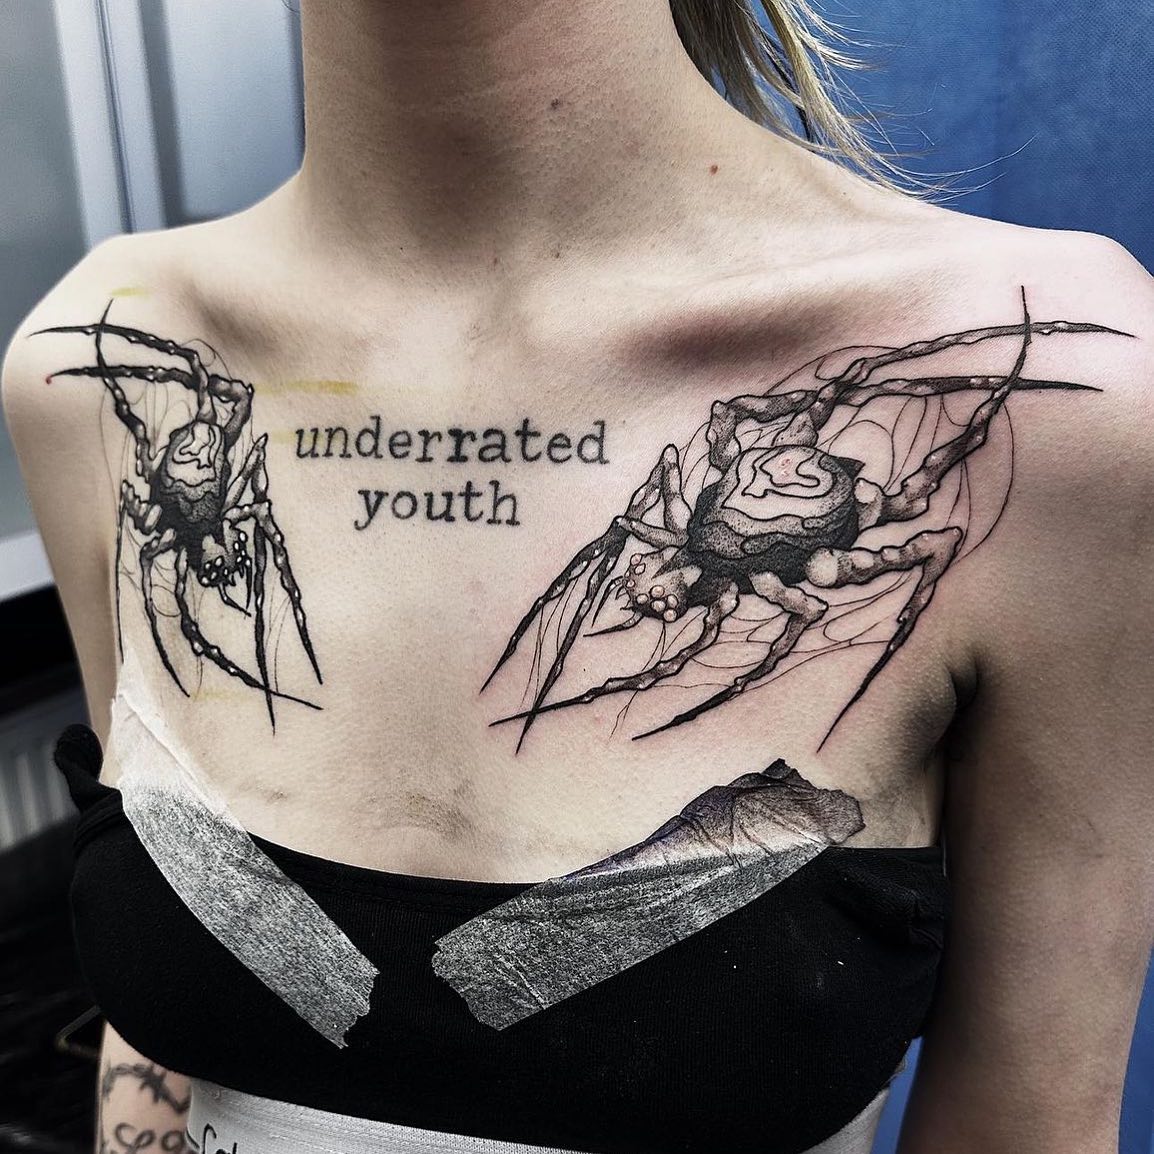 Some creepy crawlers by our very talented apprentice eilidhentattoos 

Eilidh would love to do more like this so get in touch with her if you’d like something similar! ❤️‍🔥
______________________________________

                        barber_dts stencilstuff   